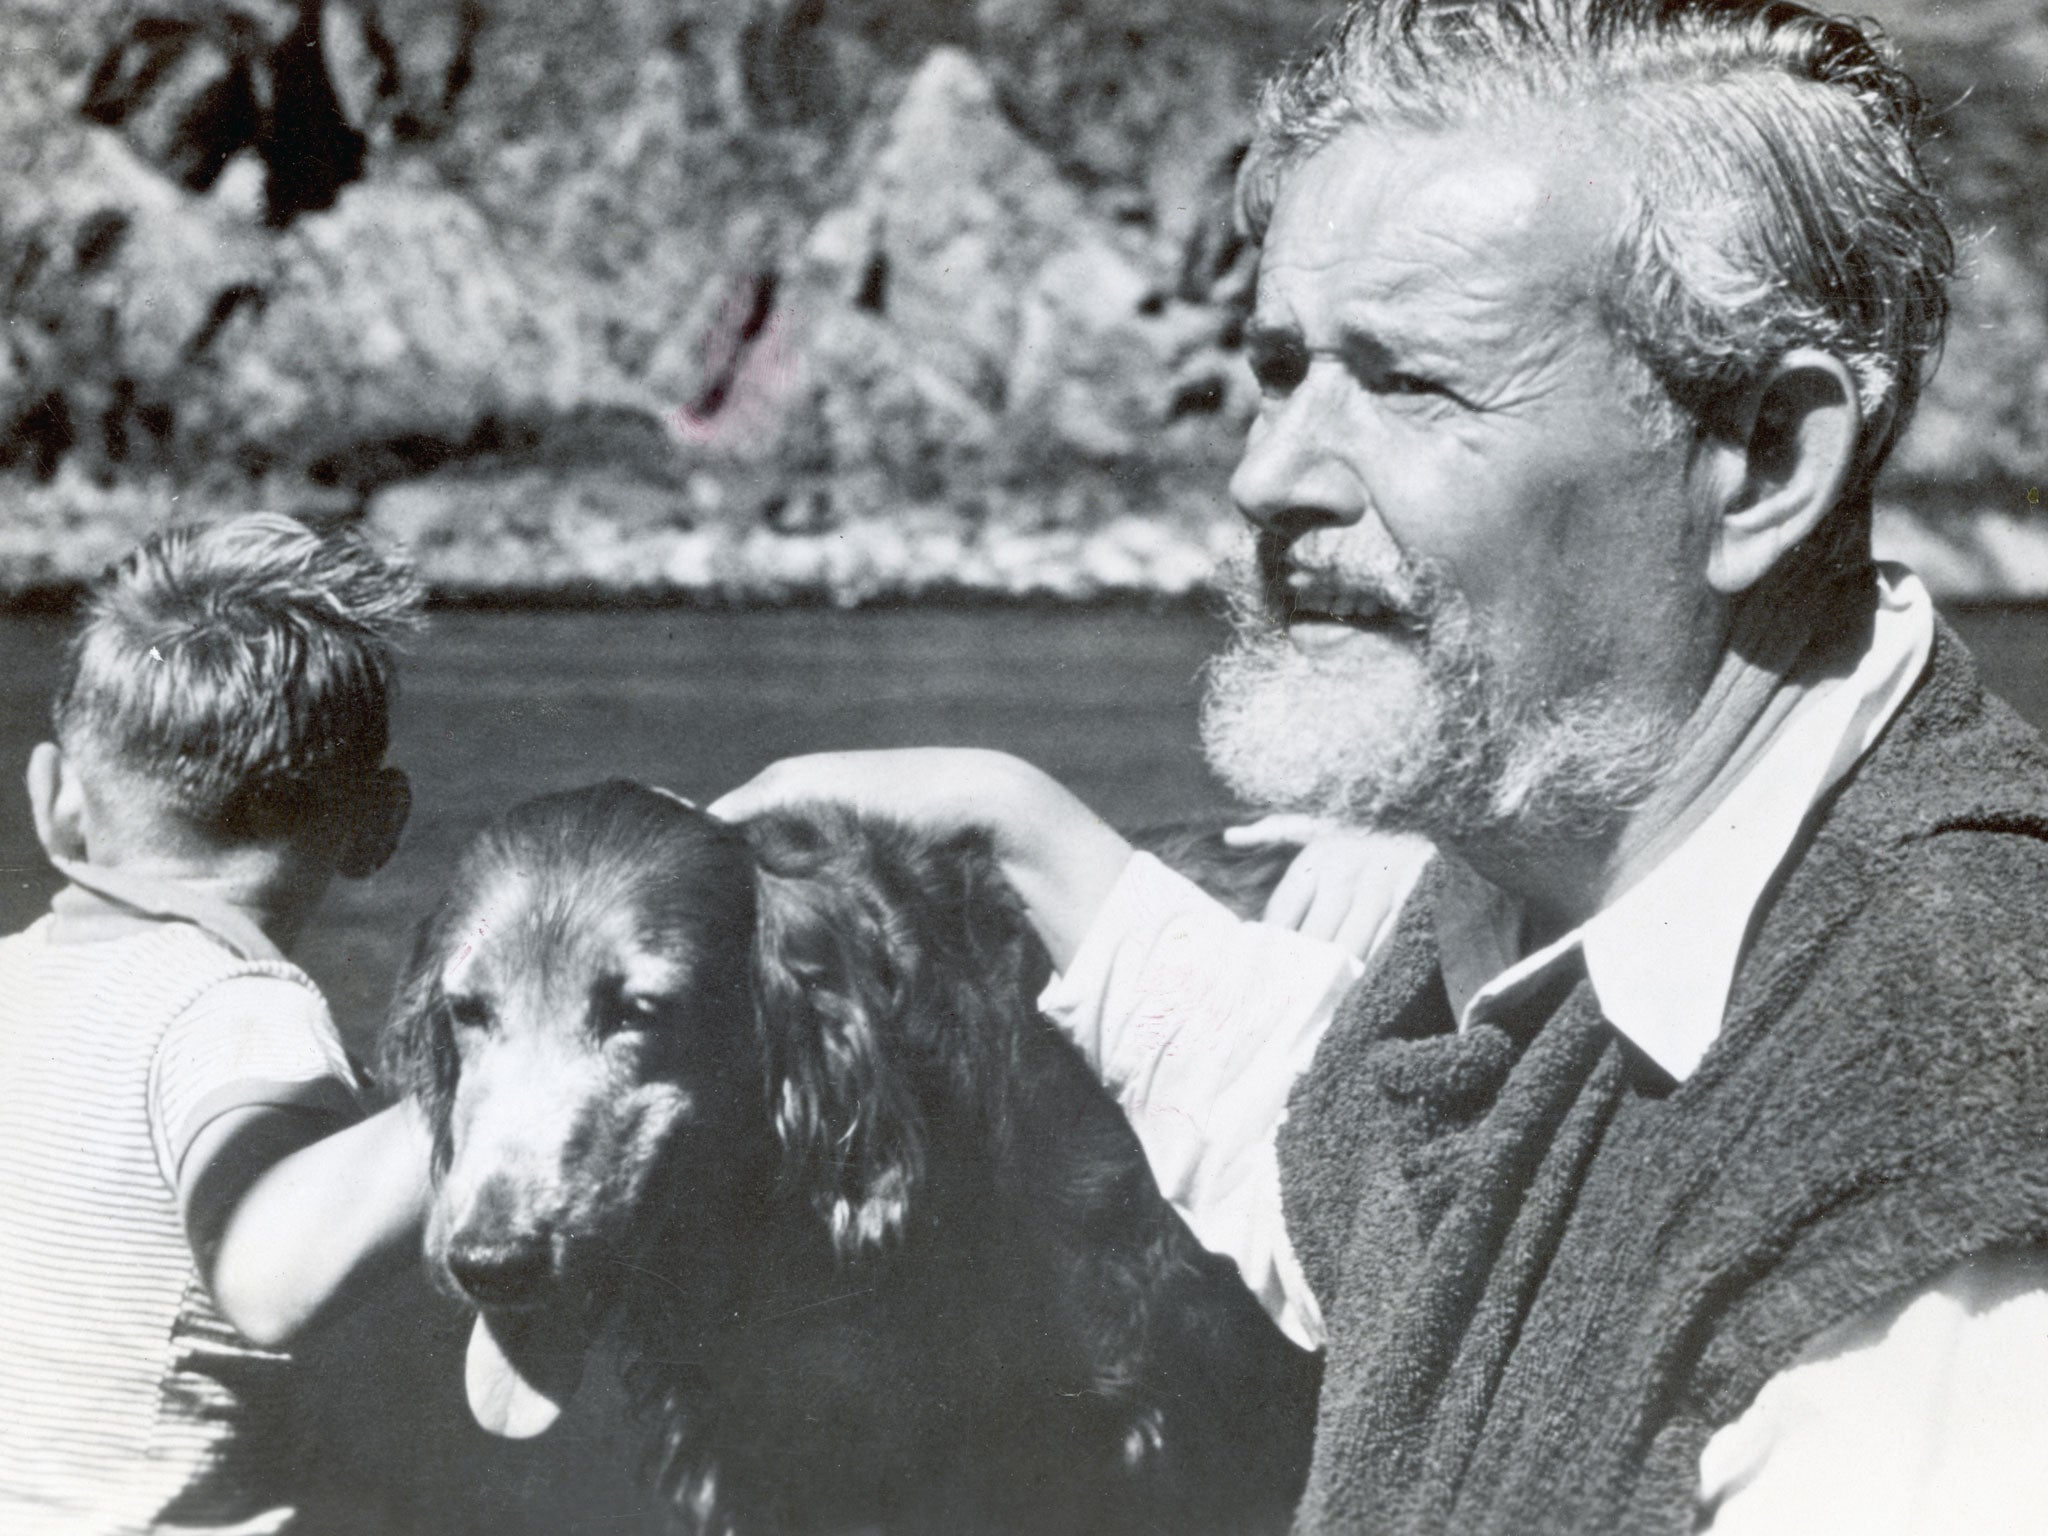 T.H. White's work can be read as a lament for the irrevocability of childhood